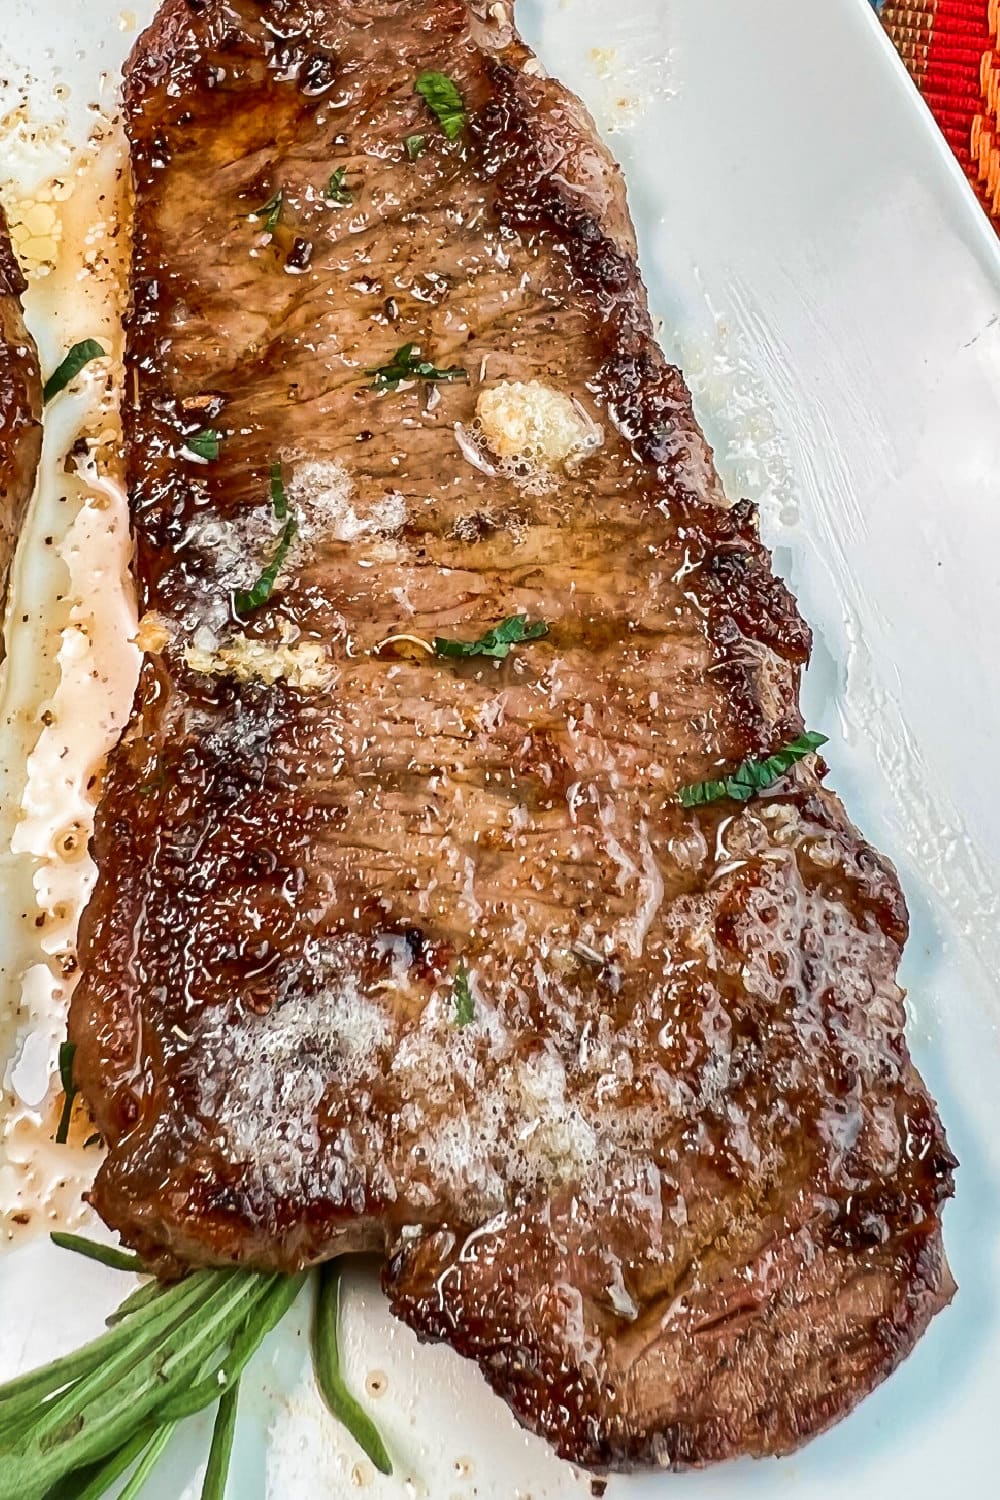 Garlic butter sauce spooned over a steak with parsley garnish. 